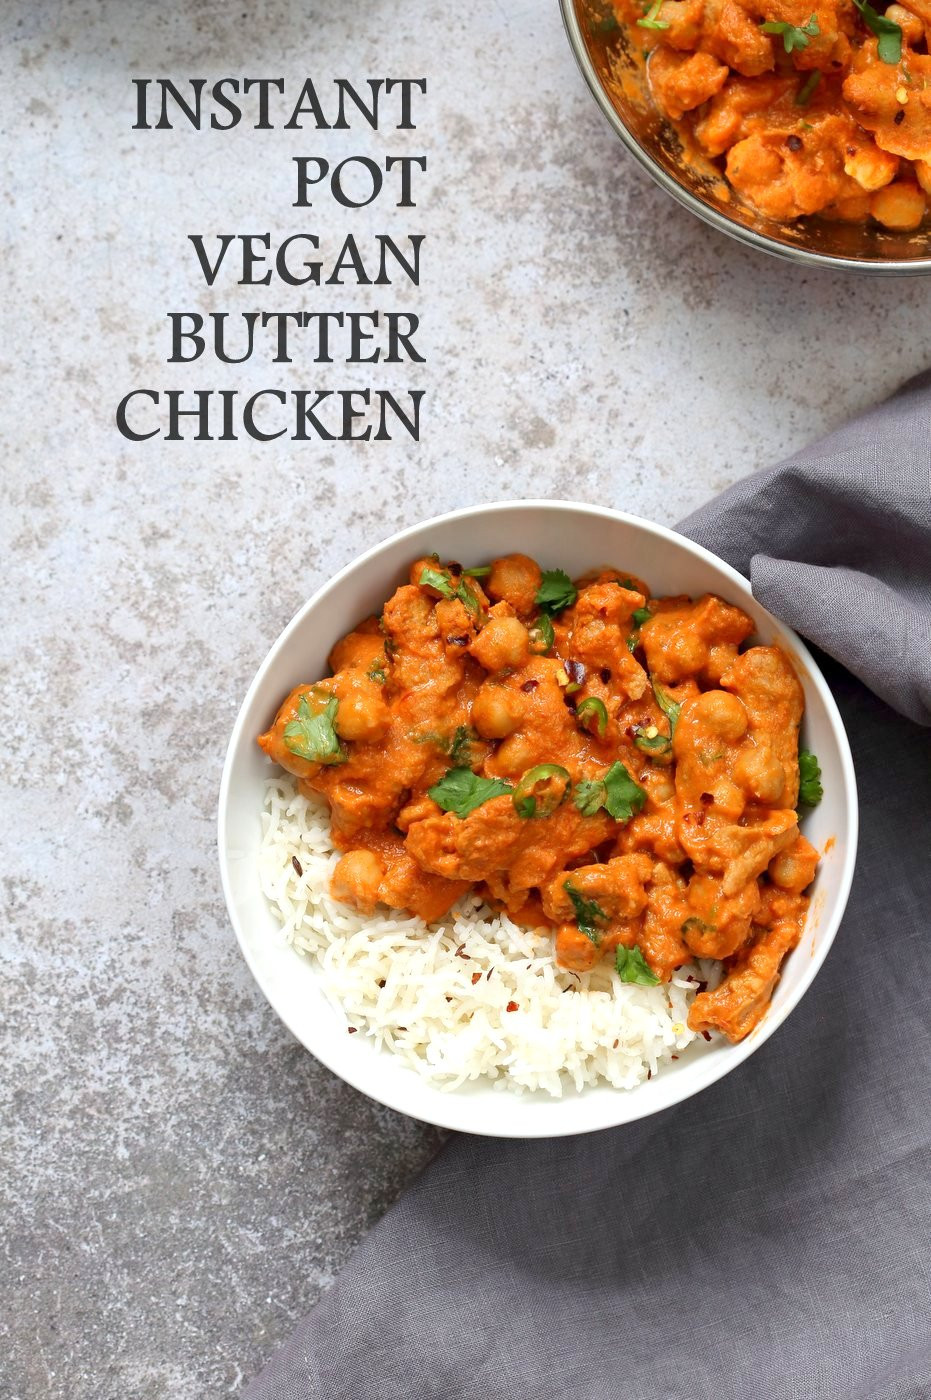 Instant Vegetarian Dinner Recipes
 Instant Pot Vegan Butter Chicken with Soy Curls and